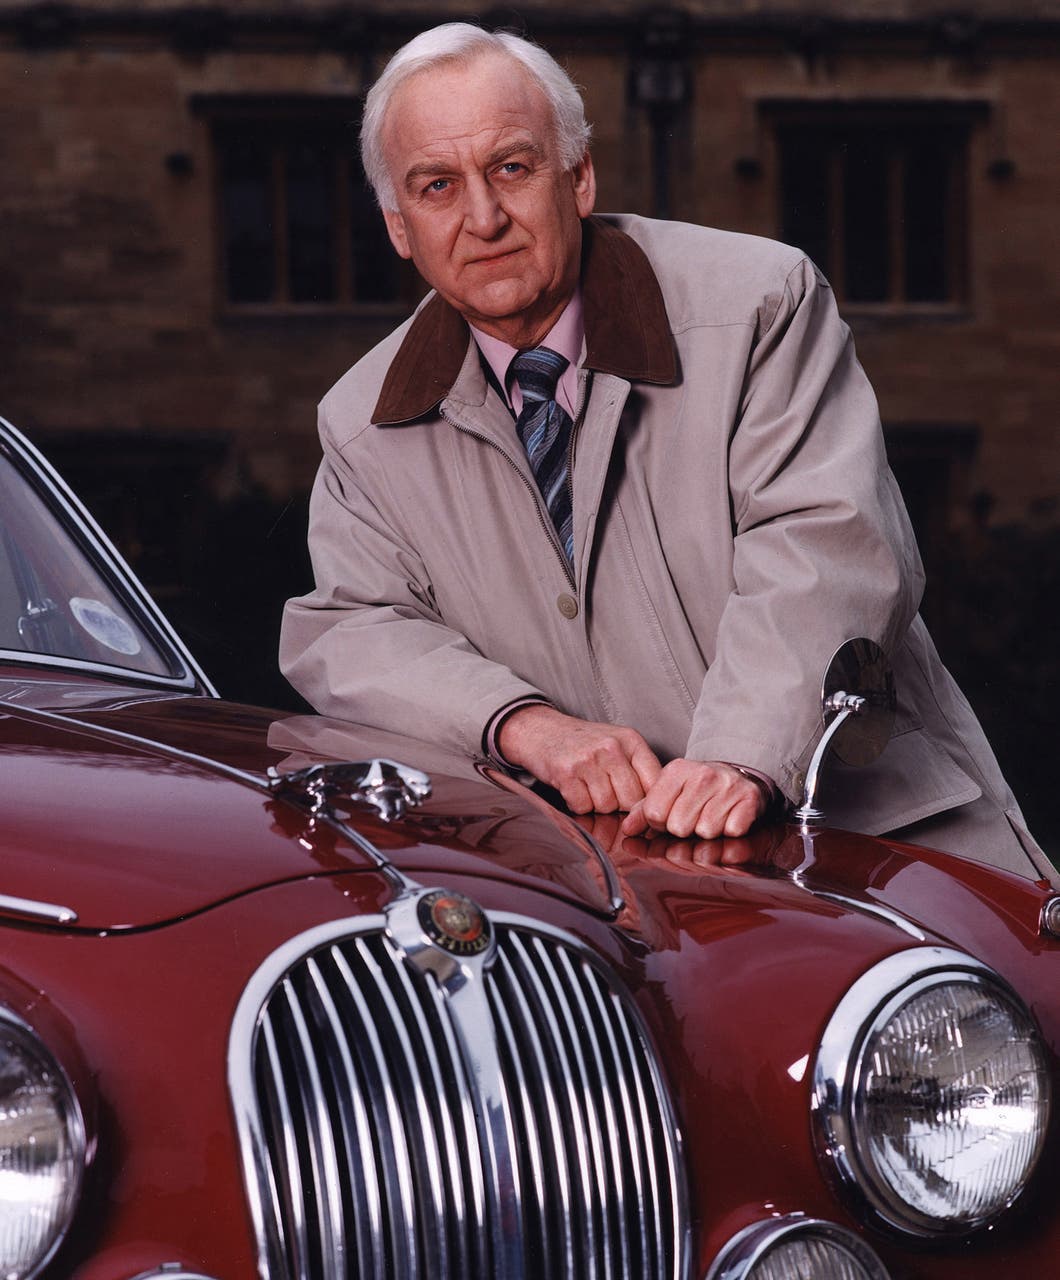 DEATH Thaw 6. John Thaw died in 2002 after battling oesophageal cancer (PA)...